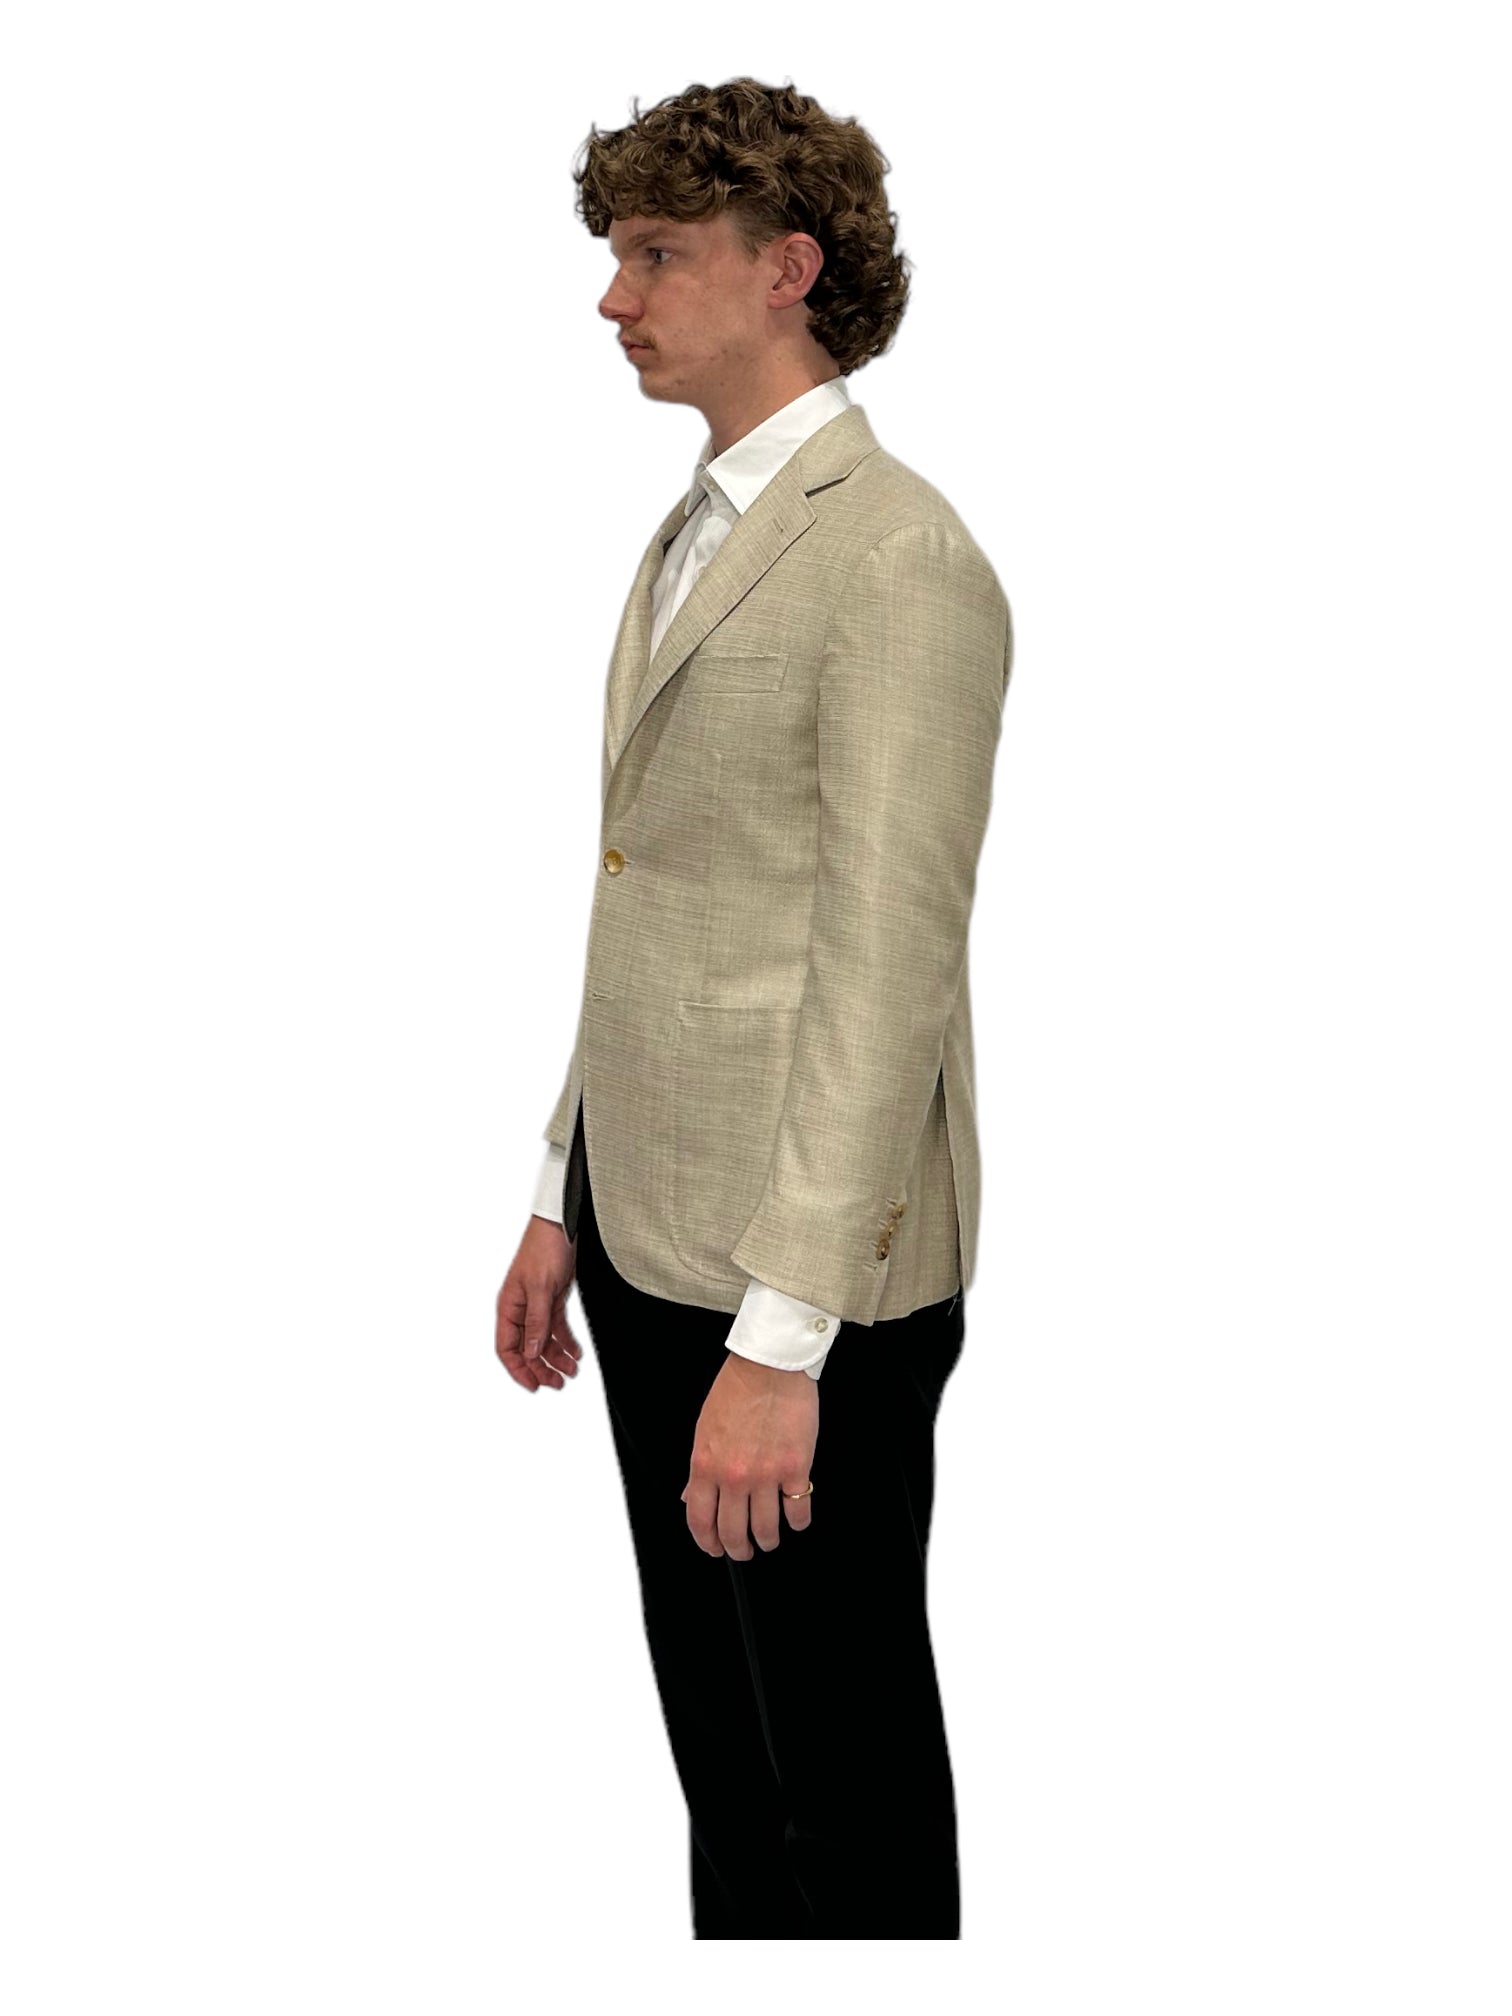 Canali Cream Cupro Blazer 38R - Genuine Design Luxury Consignment for Men. New & Pre-Owned Clothing, Shoes, & Accessories. Calgary, Canada